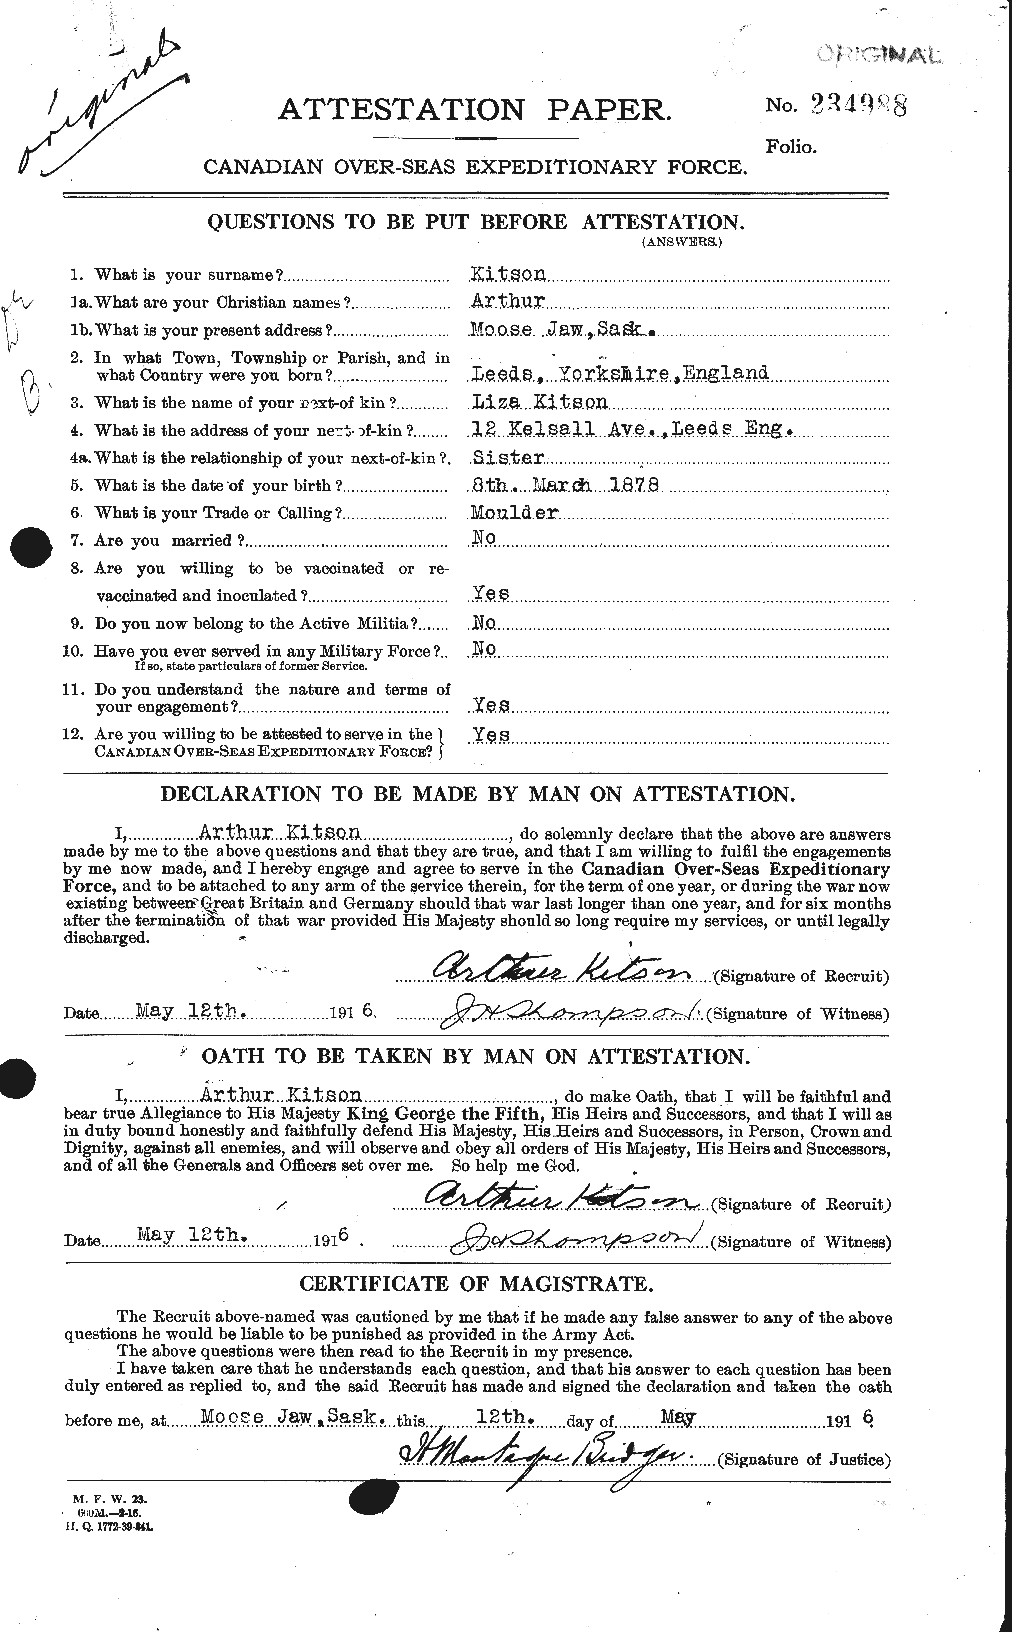 Personnel Records of the First World War - CEF 438599a